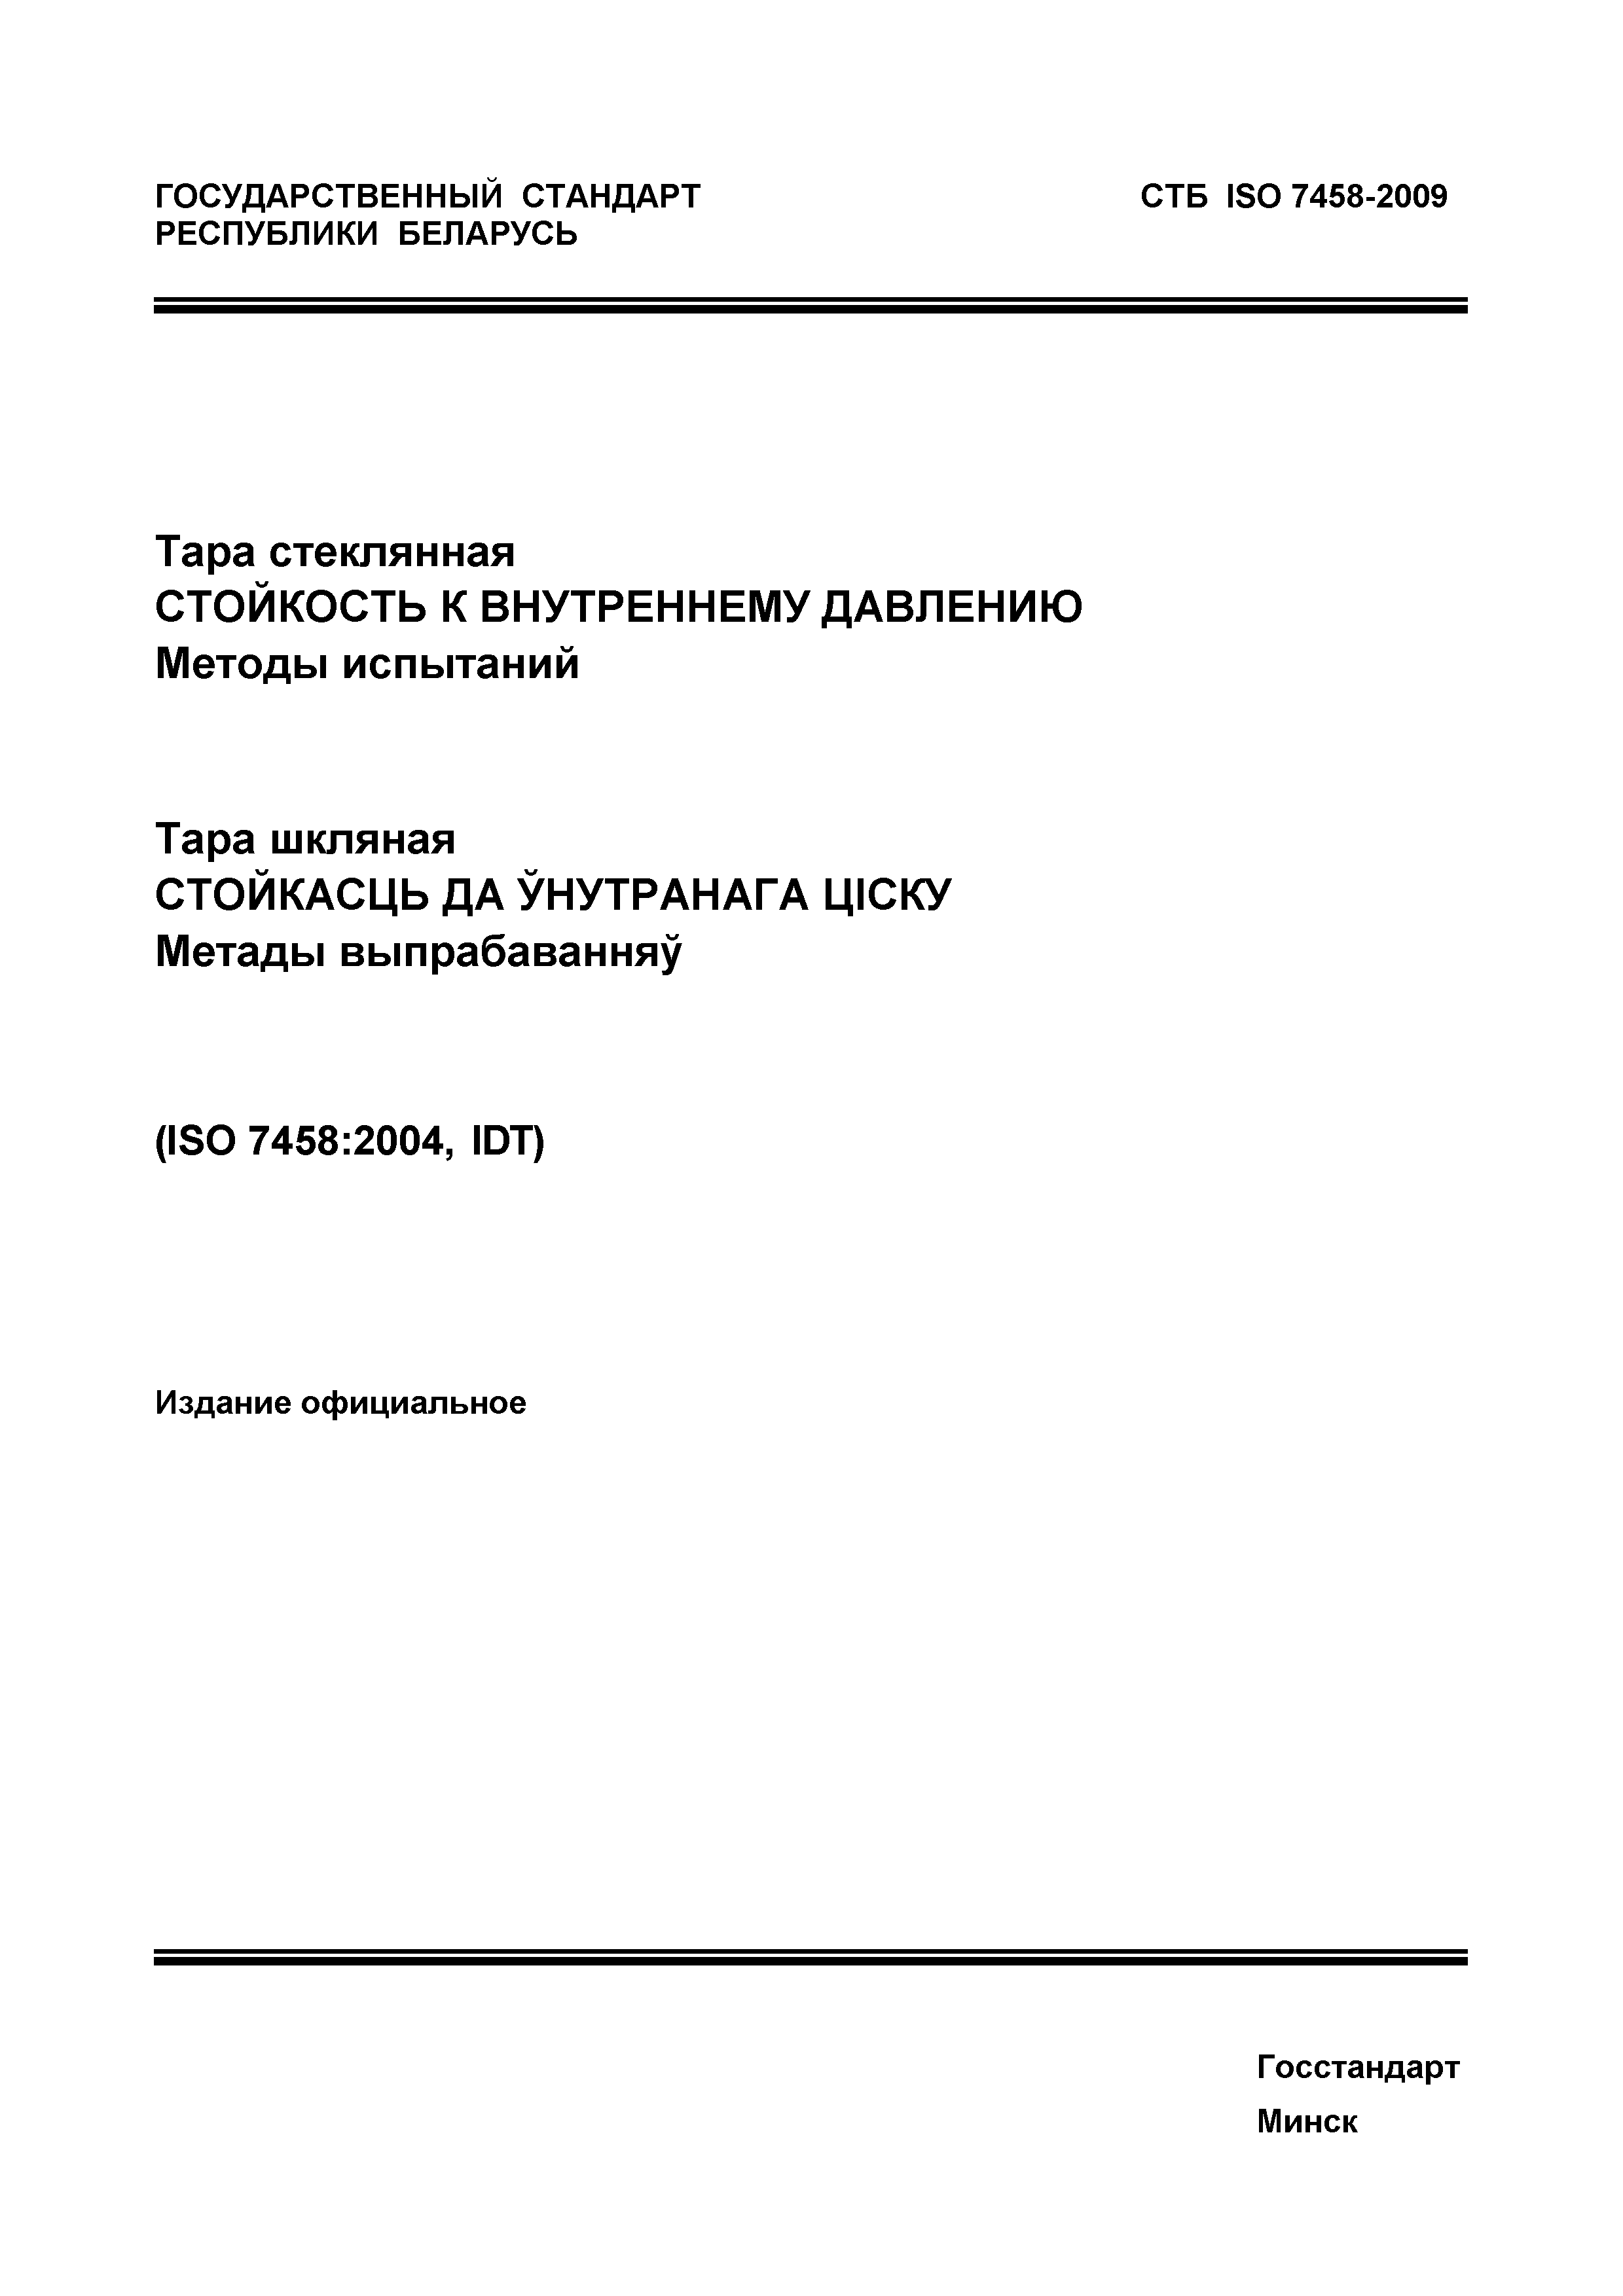 СТБ ISO 7458-2009